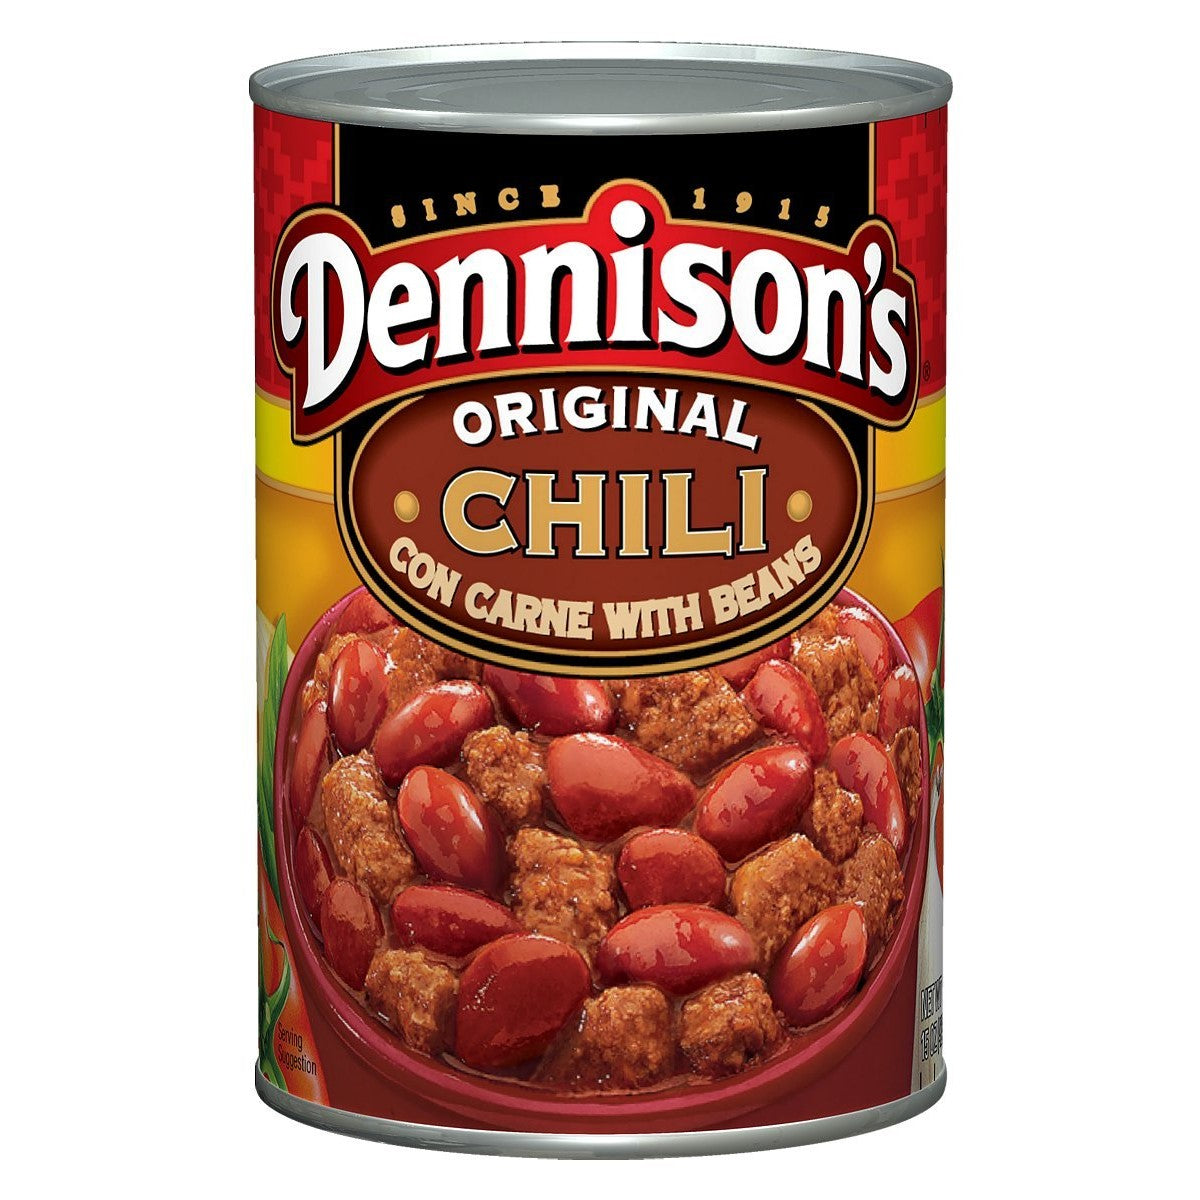 Dennison's Chili Con Carne With Beans 15oz